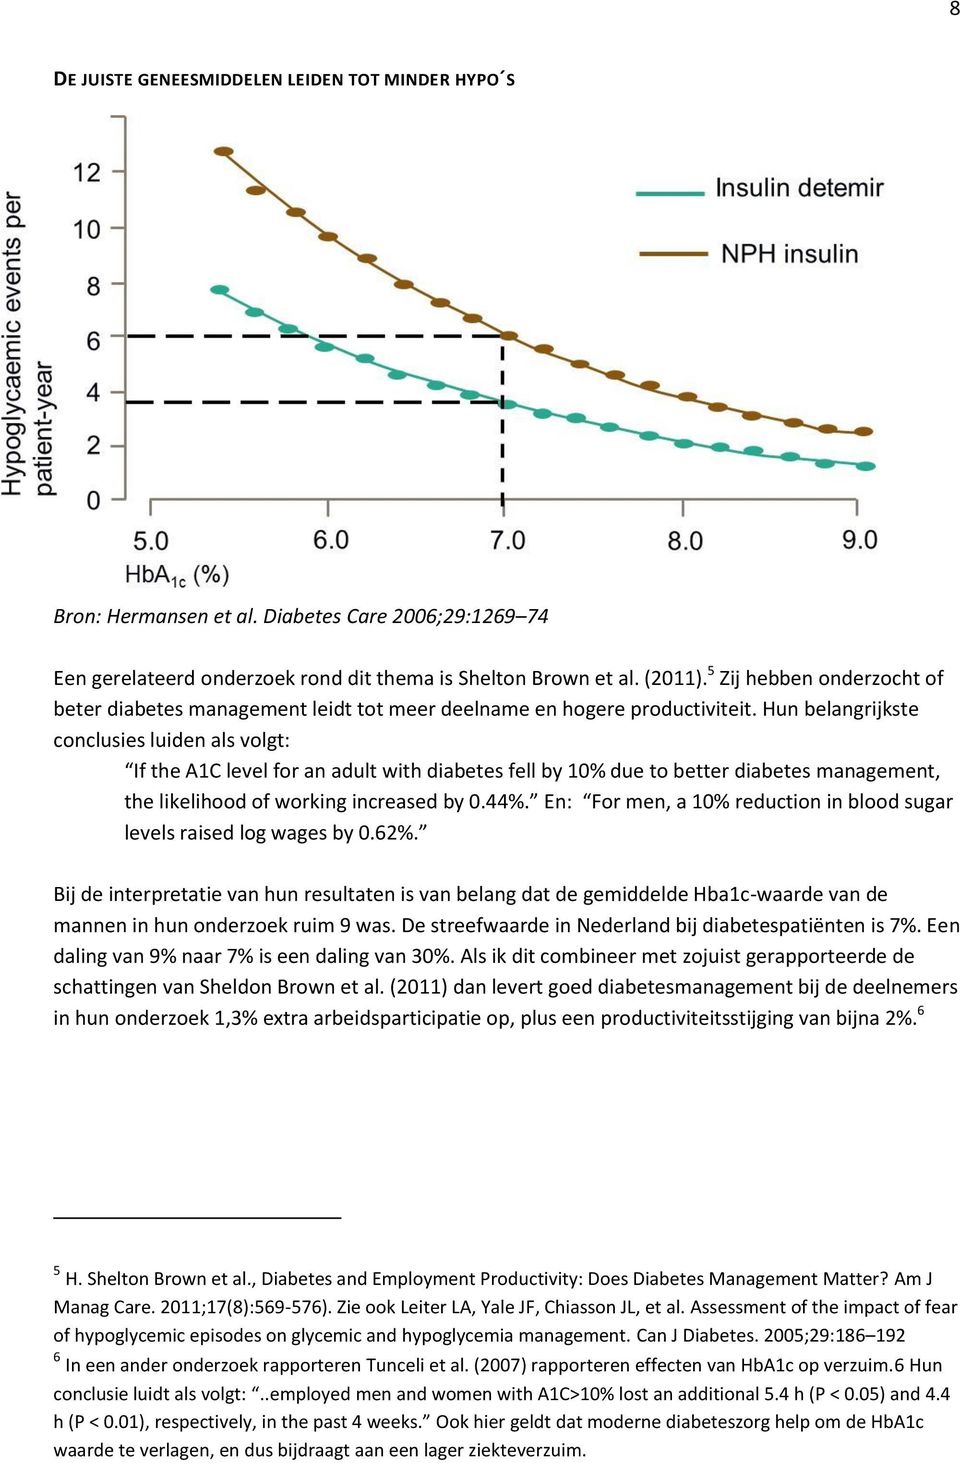 Hun belangrijkste conclusies luiden als volgt: If the A1C level for an adult with diabetes fell by 10% due to better diabetes management, the likelihood of working increased by 0.44%.